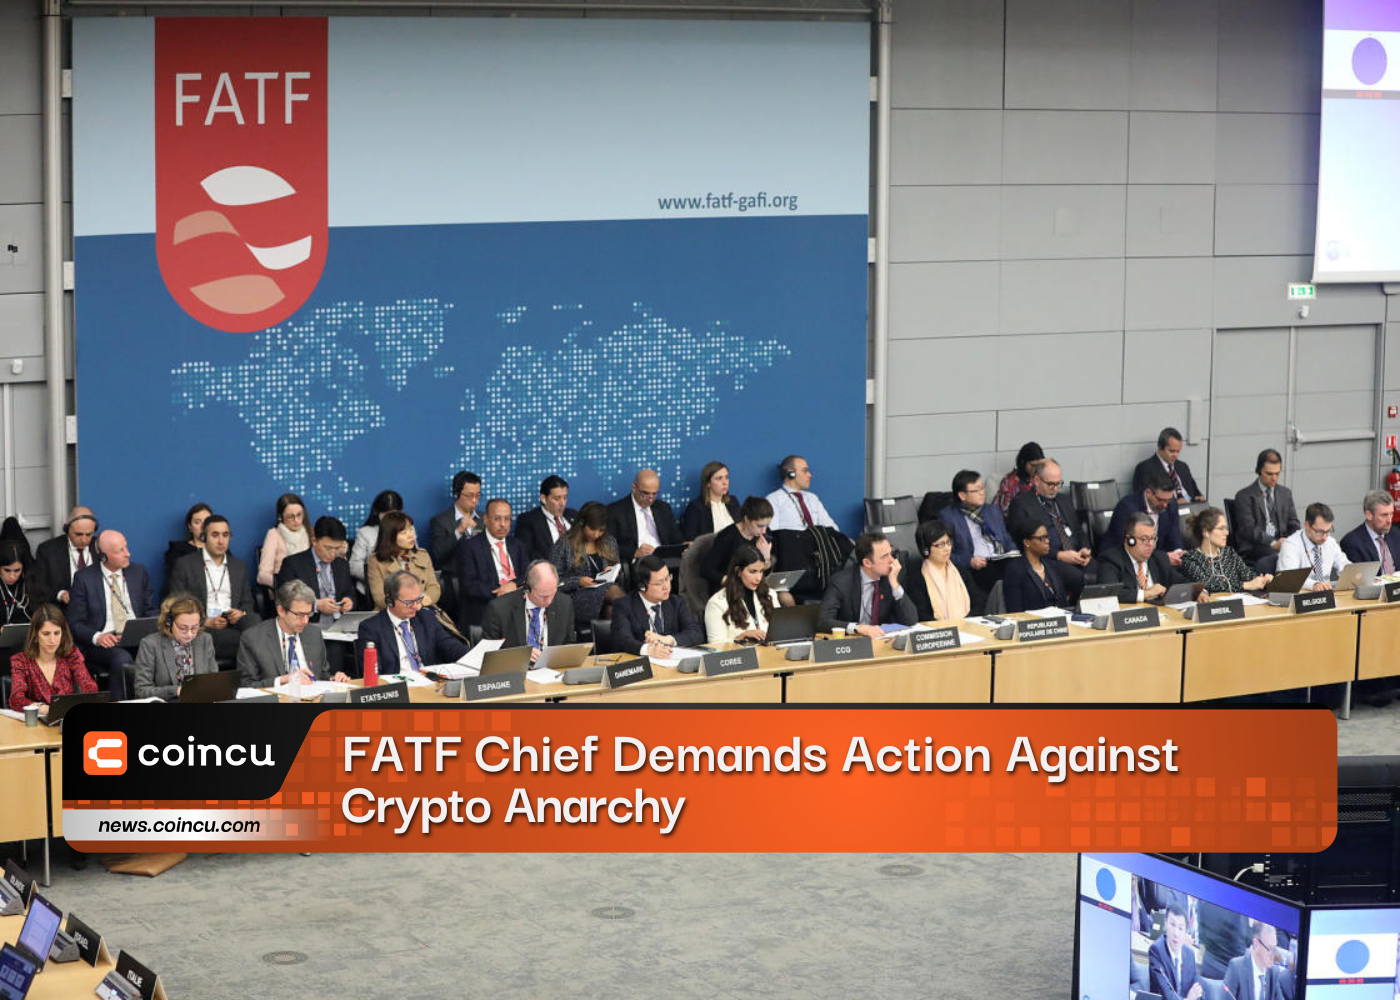 FATF Chief Demands Action Agains